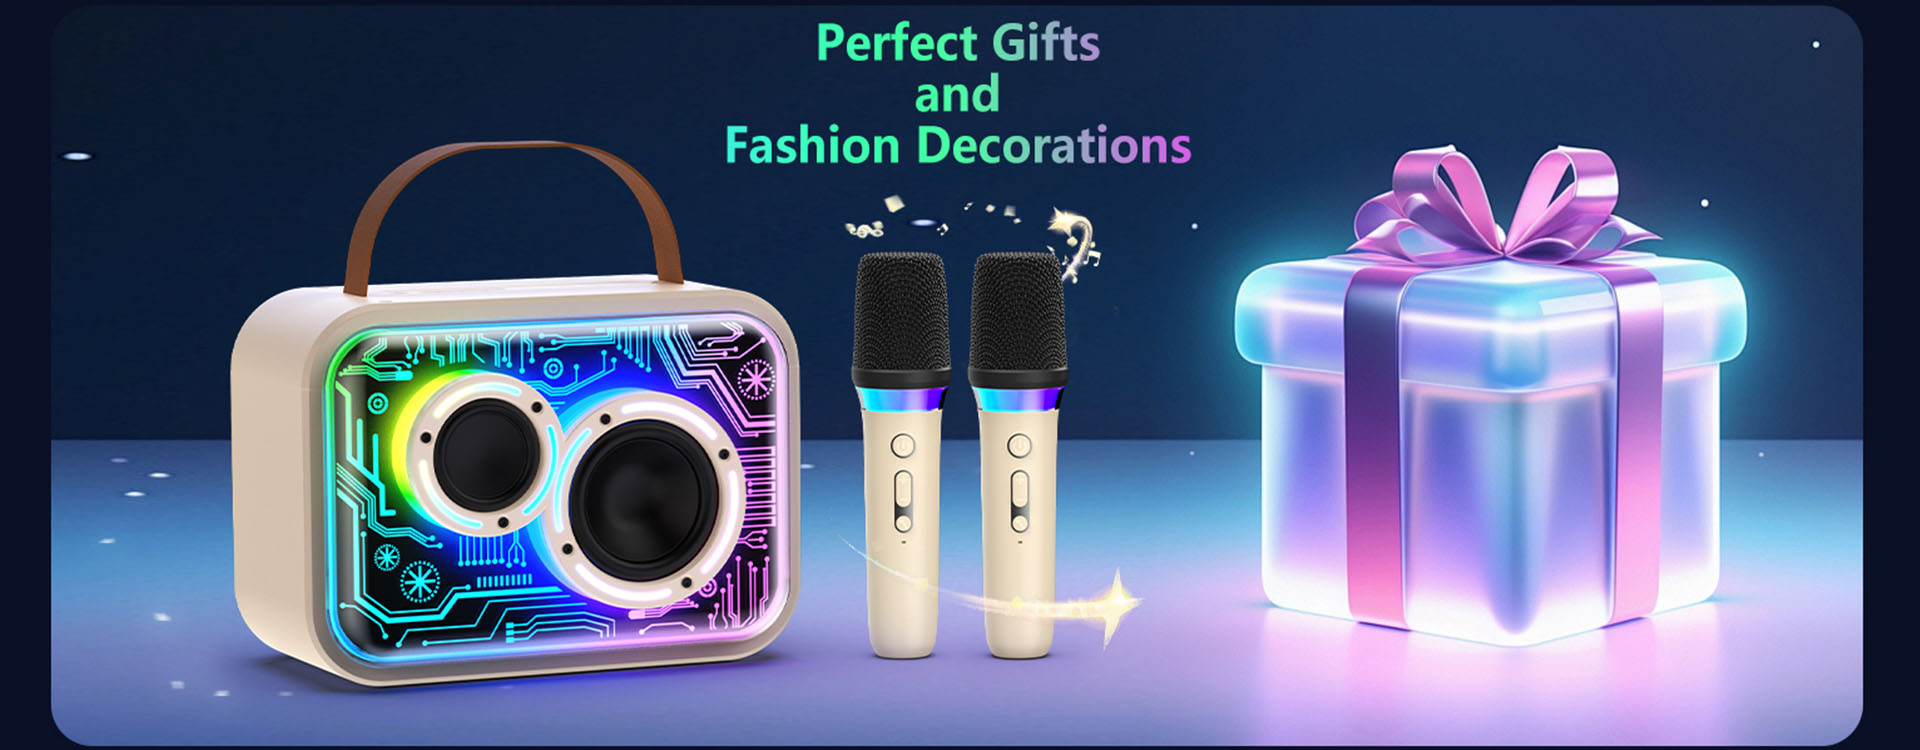 JYX D30 Karaoke Machine with Bluetooth and Wireless Mic, perfect gifts and fashion decorations.